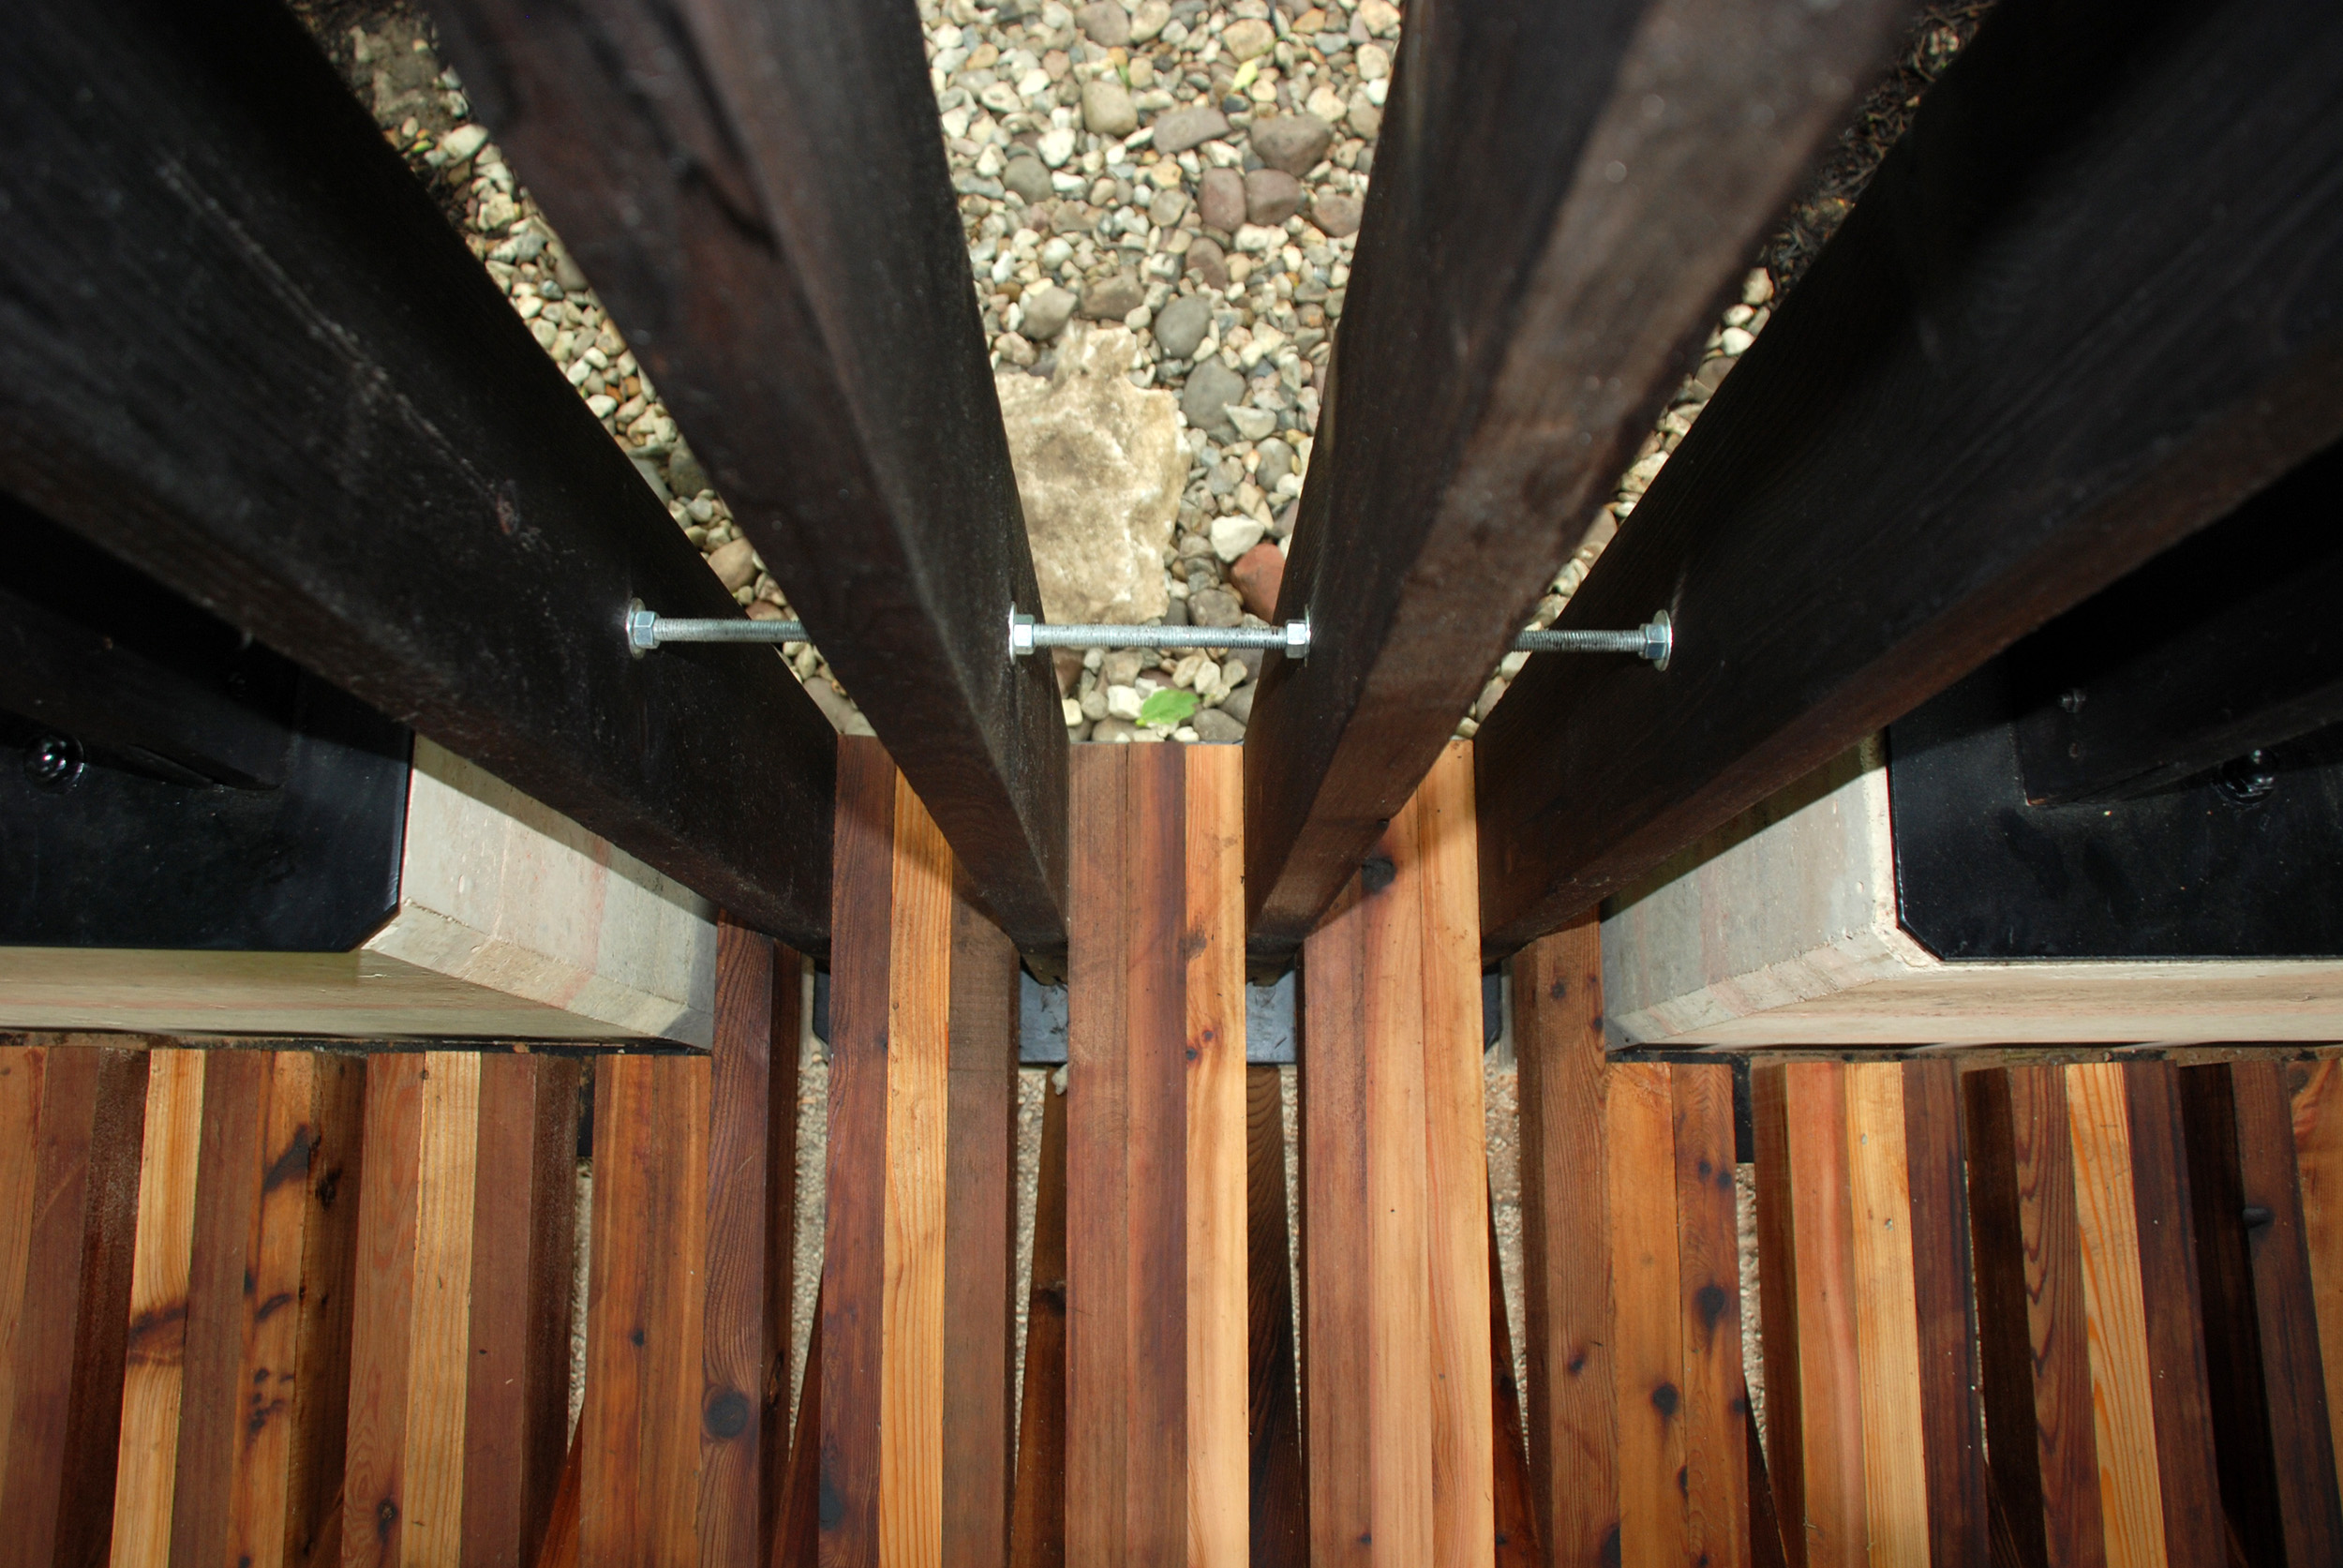 Sensory Pavilion, a detail of the connection between timber screen and timber bench